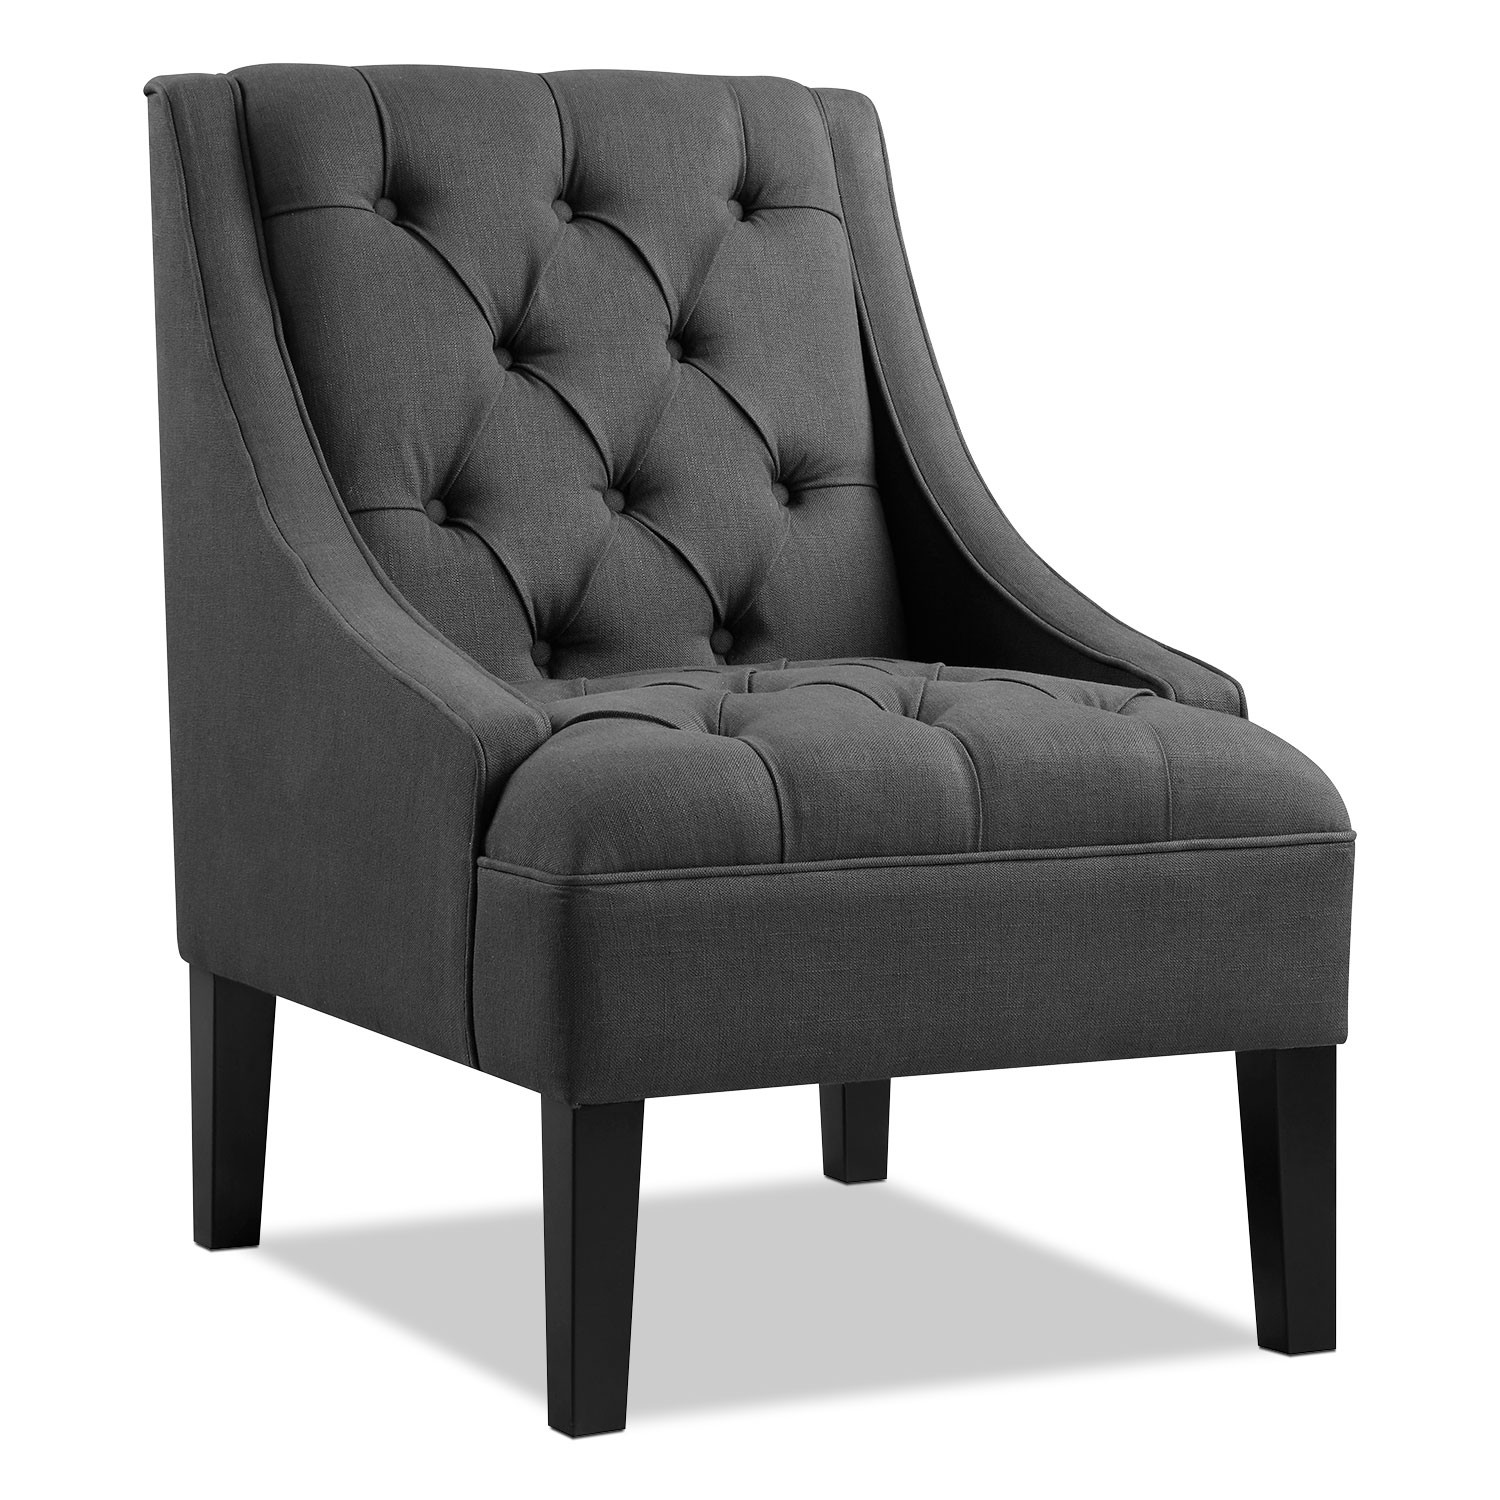 Accent Chairs For Living Room
 Greylin Accent Chair Gray